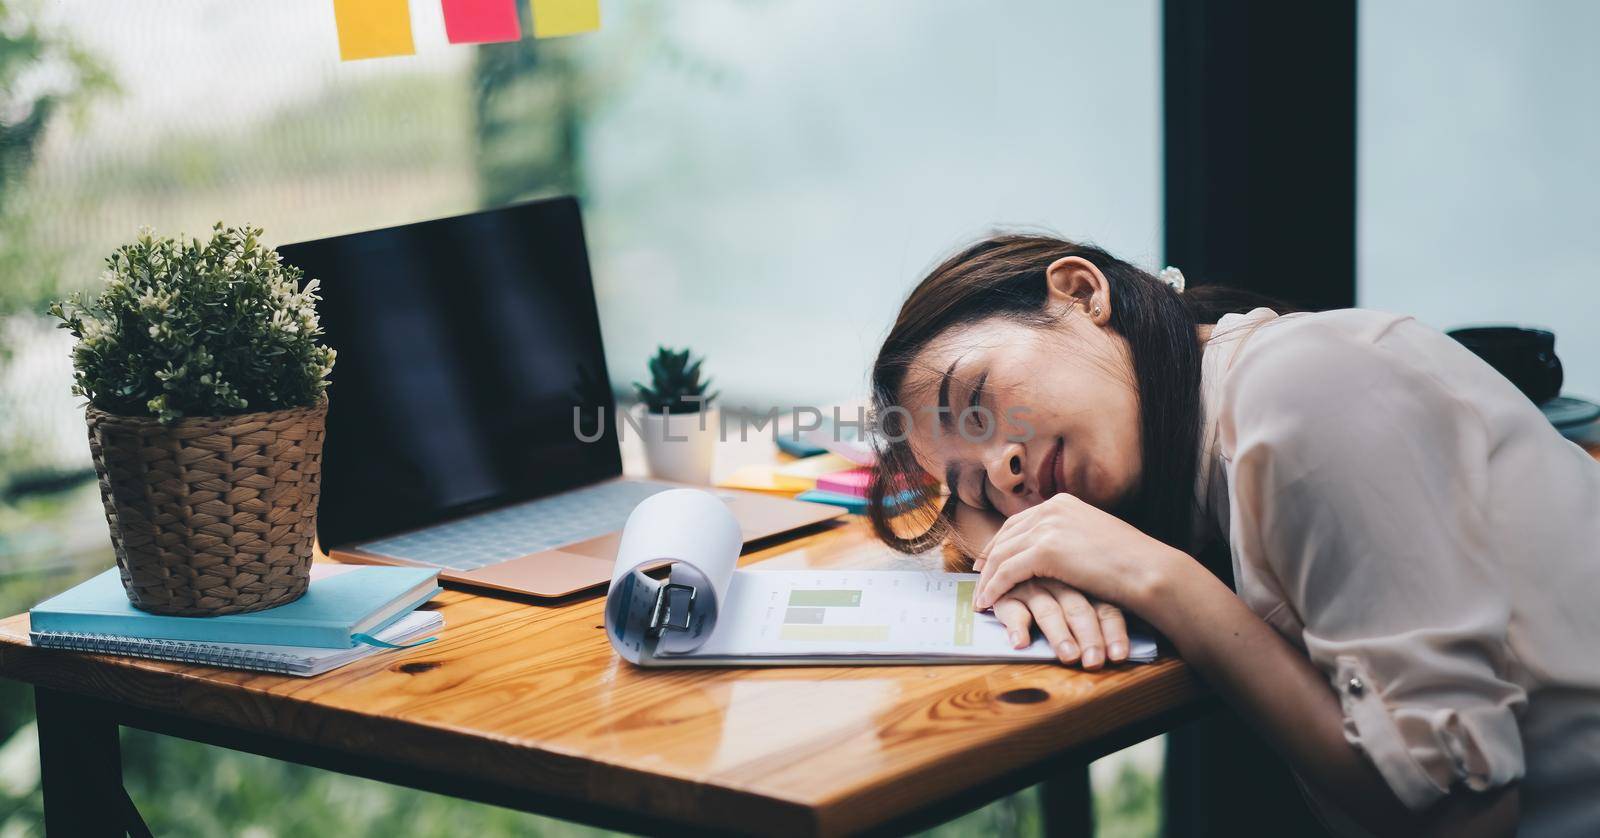 Tired and overworked business woman. Young exhausted girl sleeping on table during her work Entrepreneur, freelance worker in stress concept by nateemee